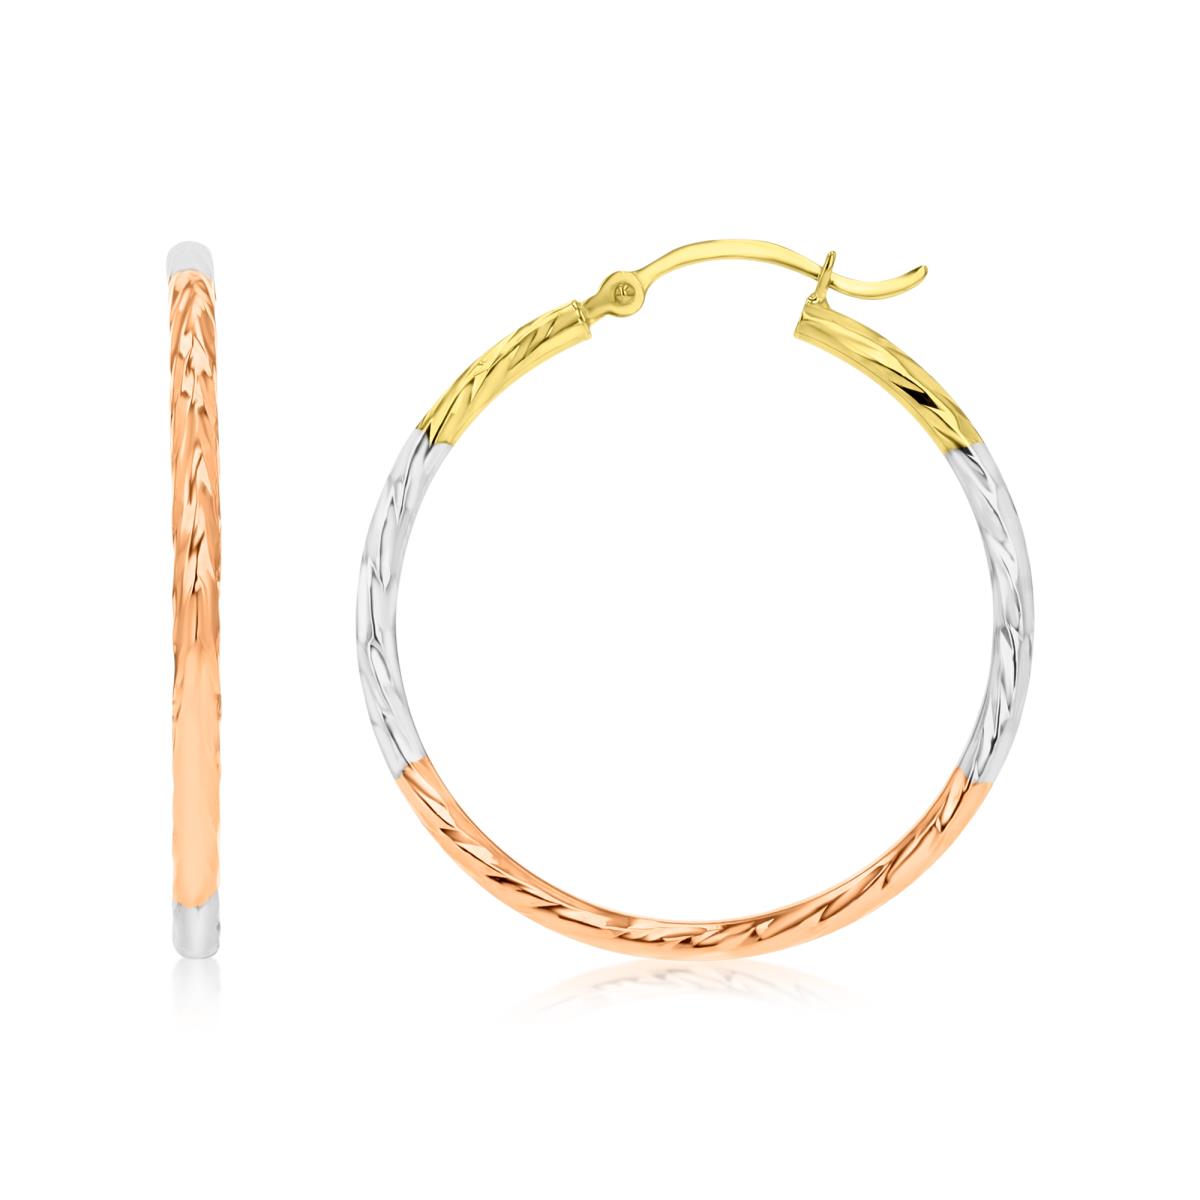 14K Gold Tricolor 2x30mm (1.25") Twisted DC Hoop Earring